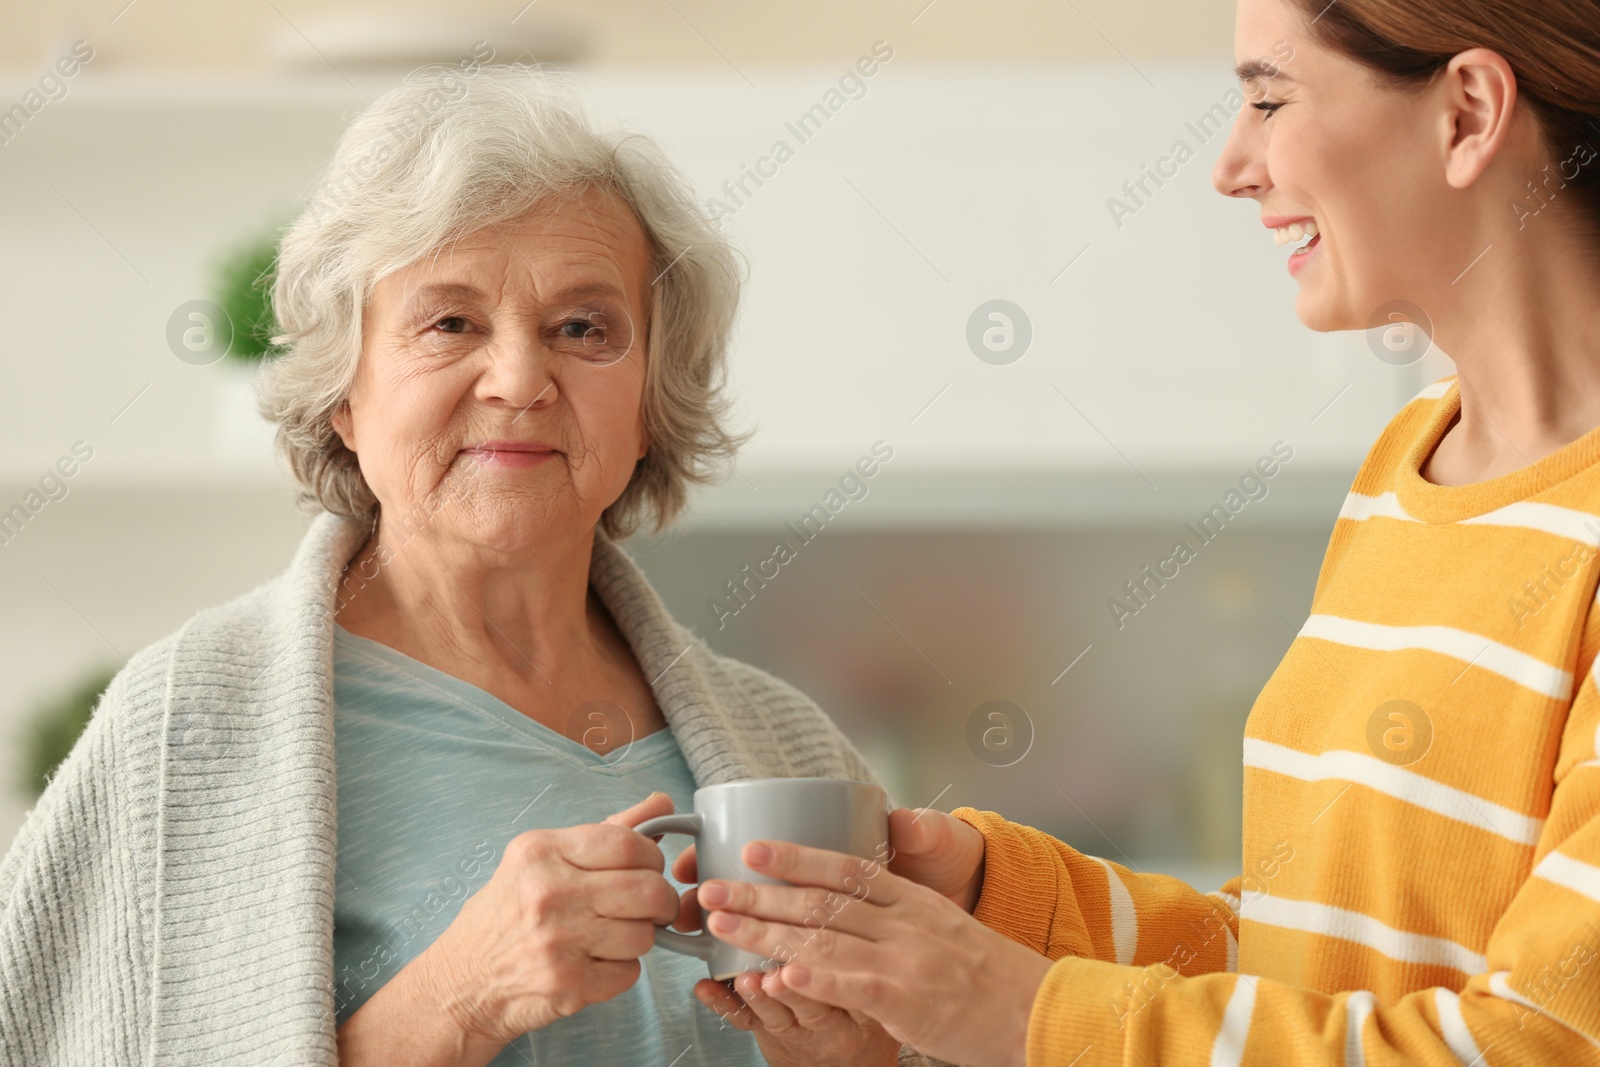 Photo of Female caregiver and elderly woman with cup of tea in kitchen